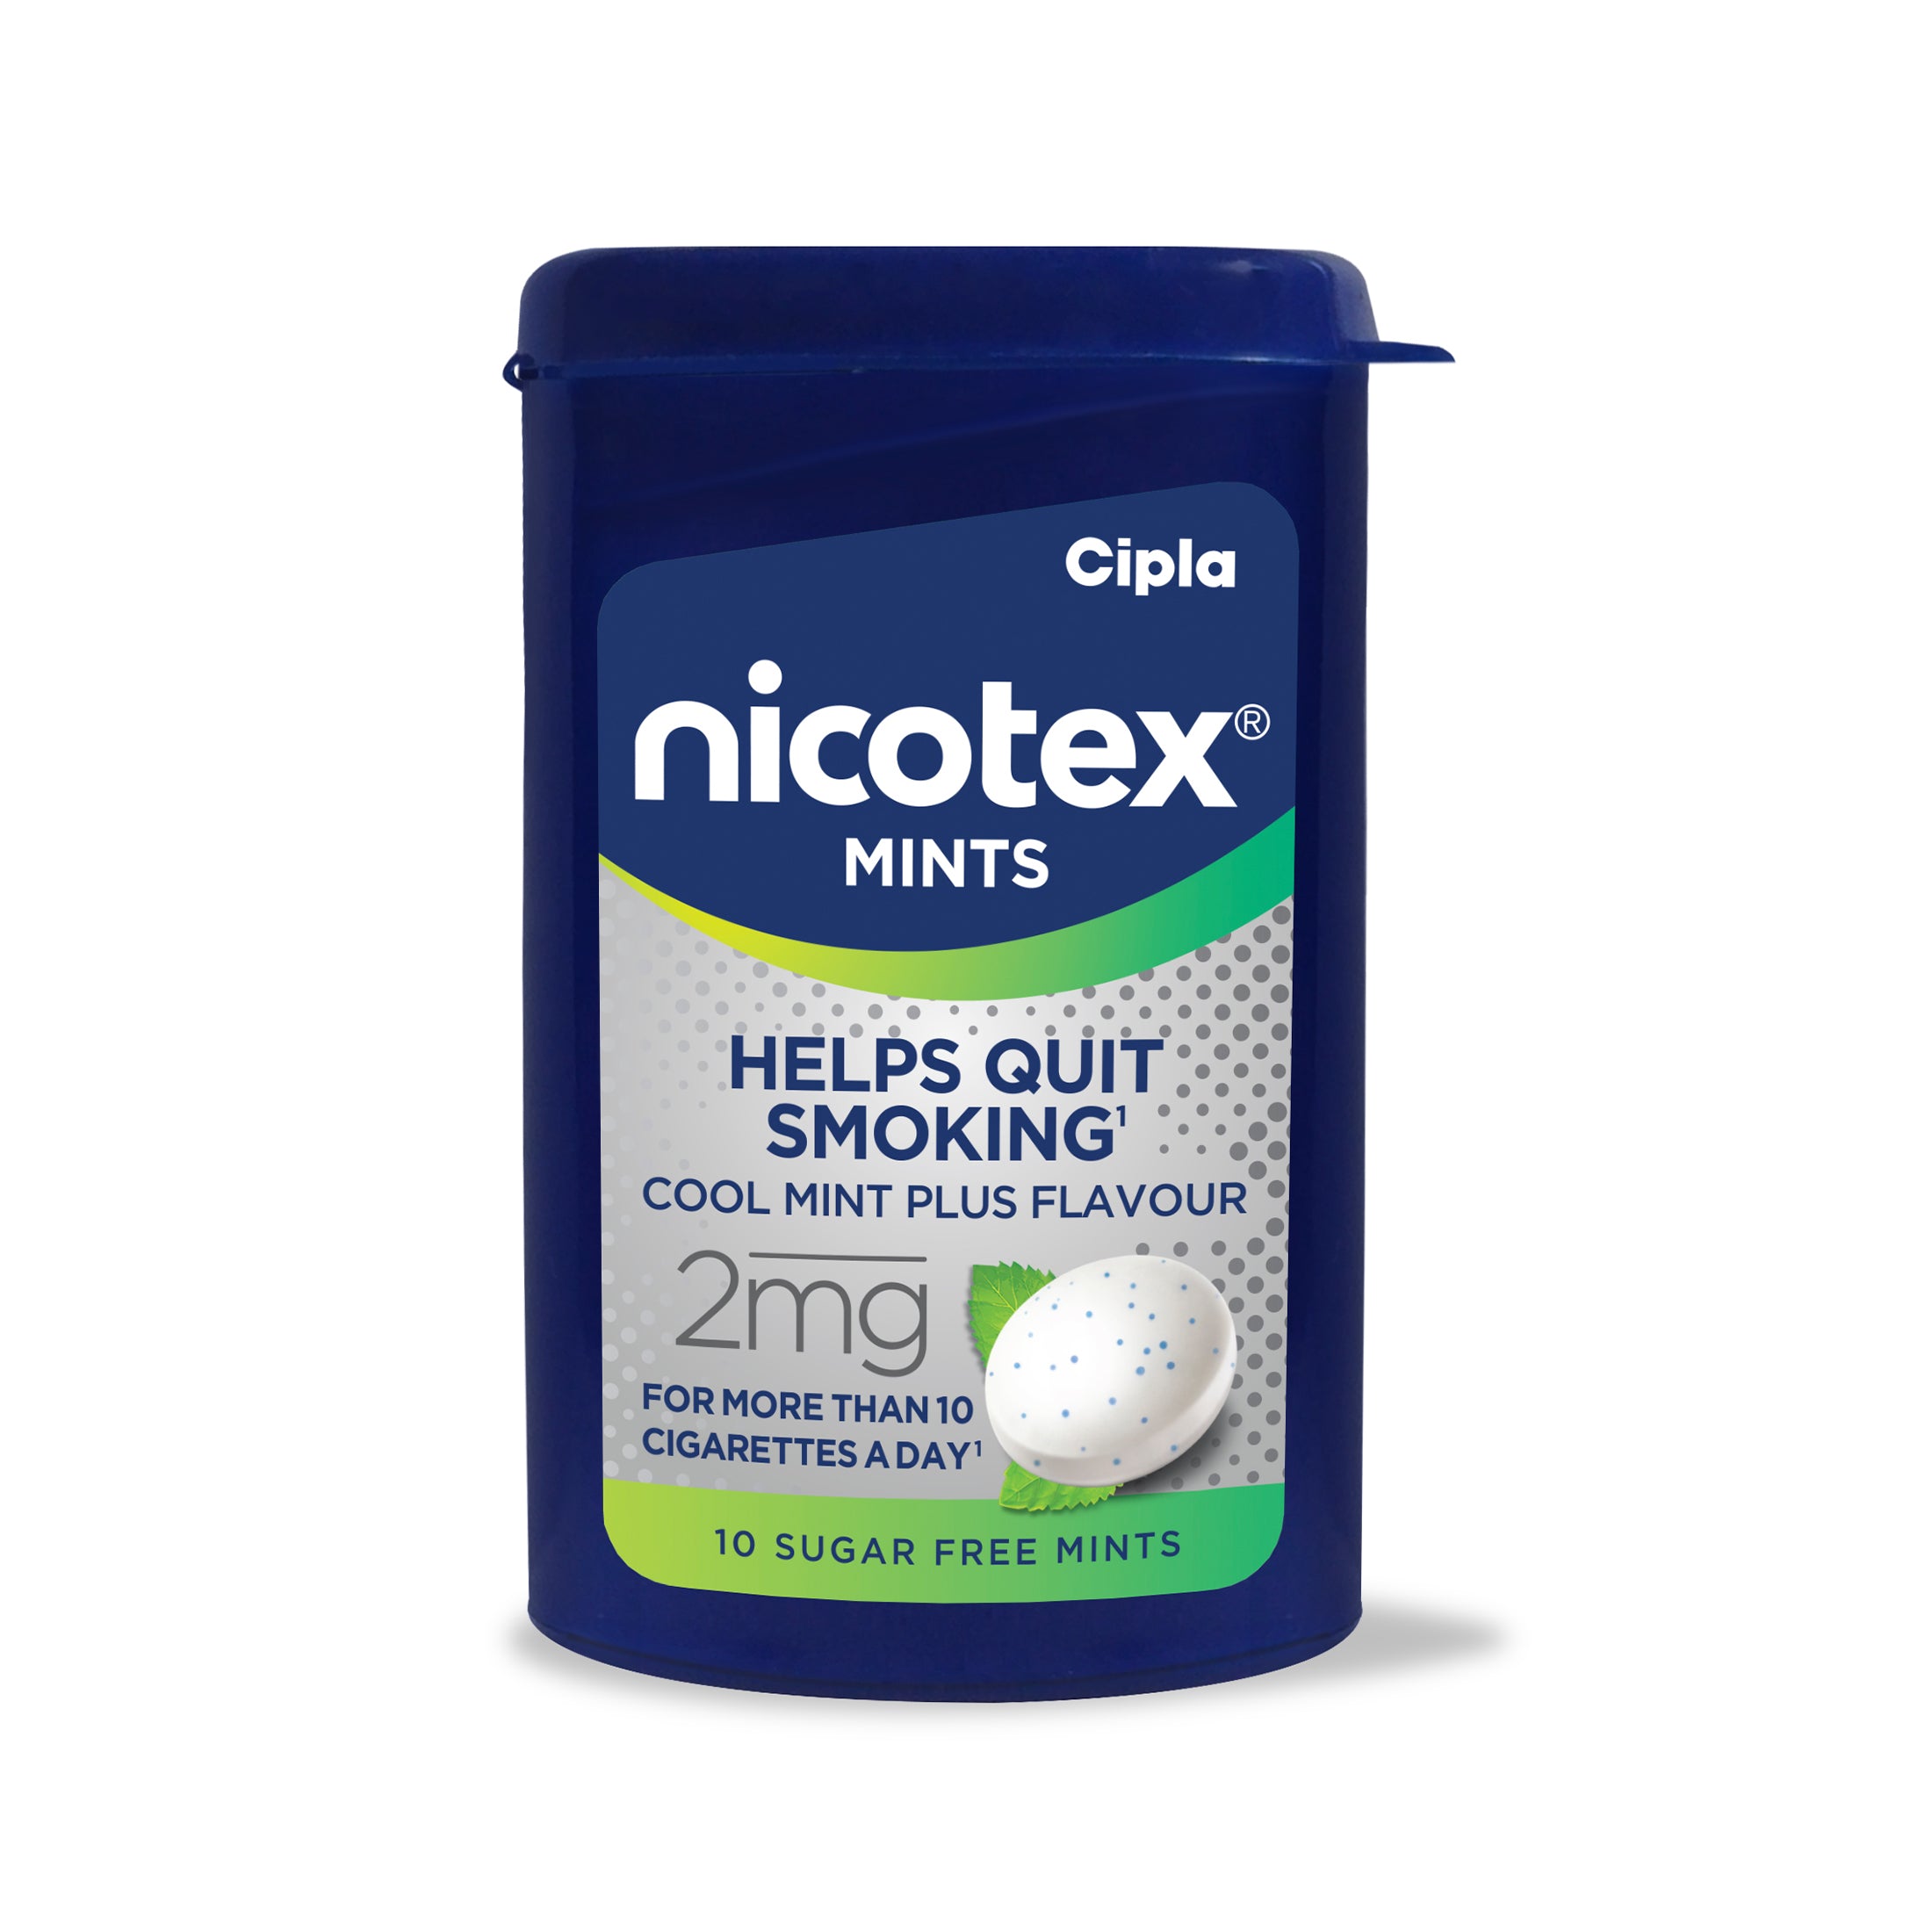 Nicotex Mints - 2mg Container